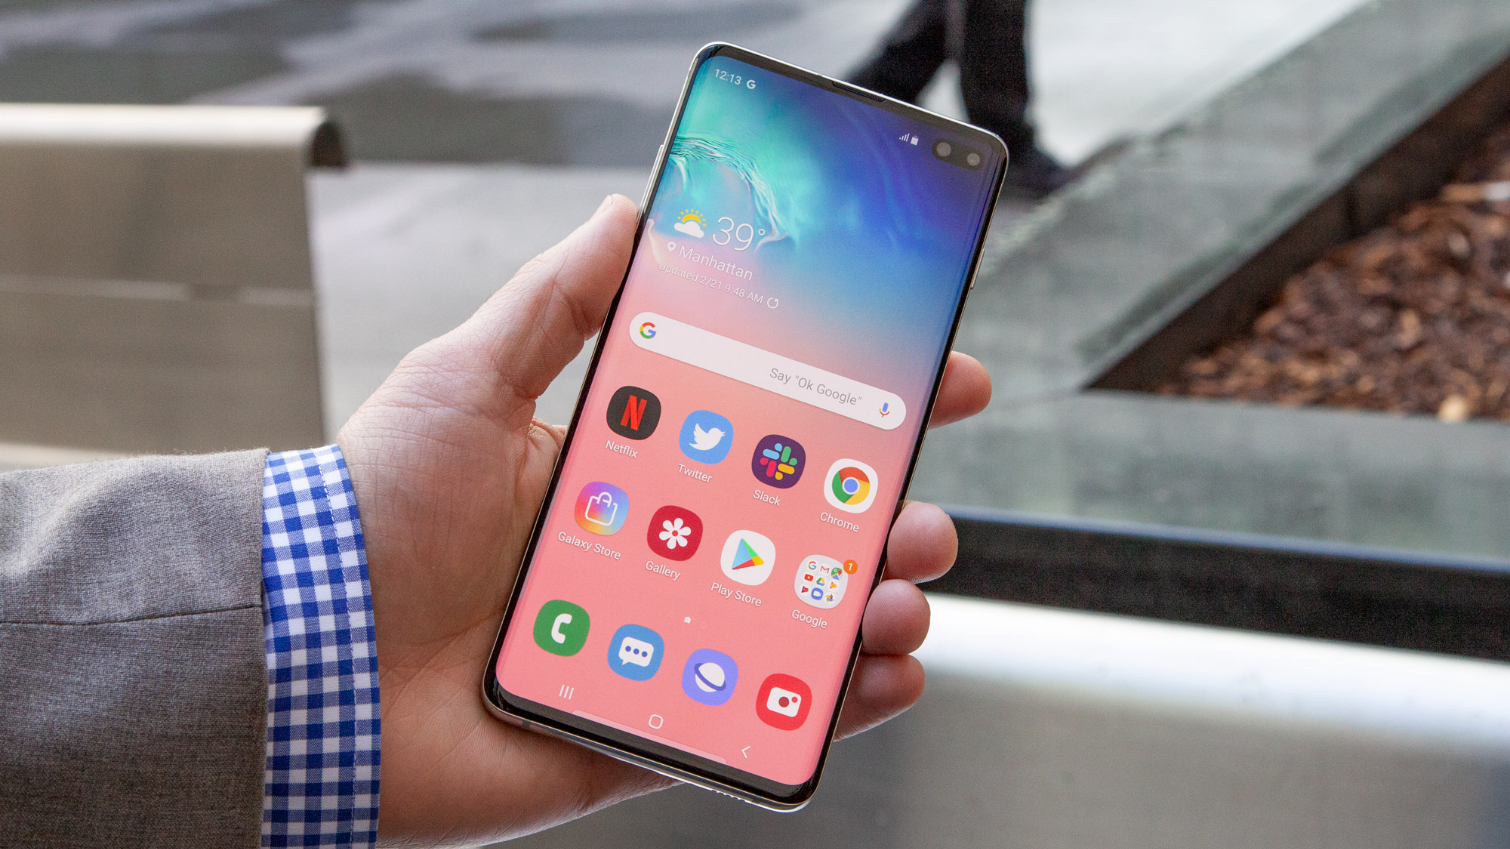 Samsung Galaxy S10 Plus review | Tom's Guide